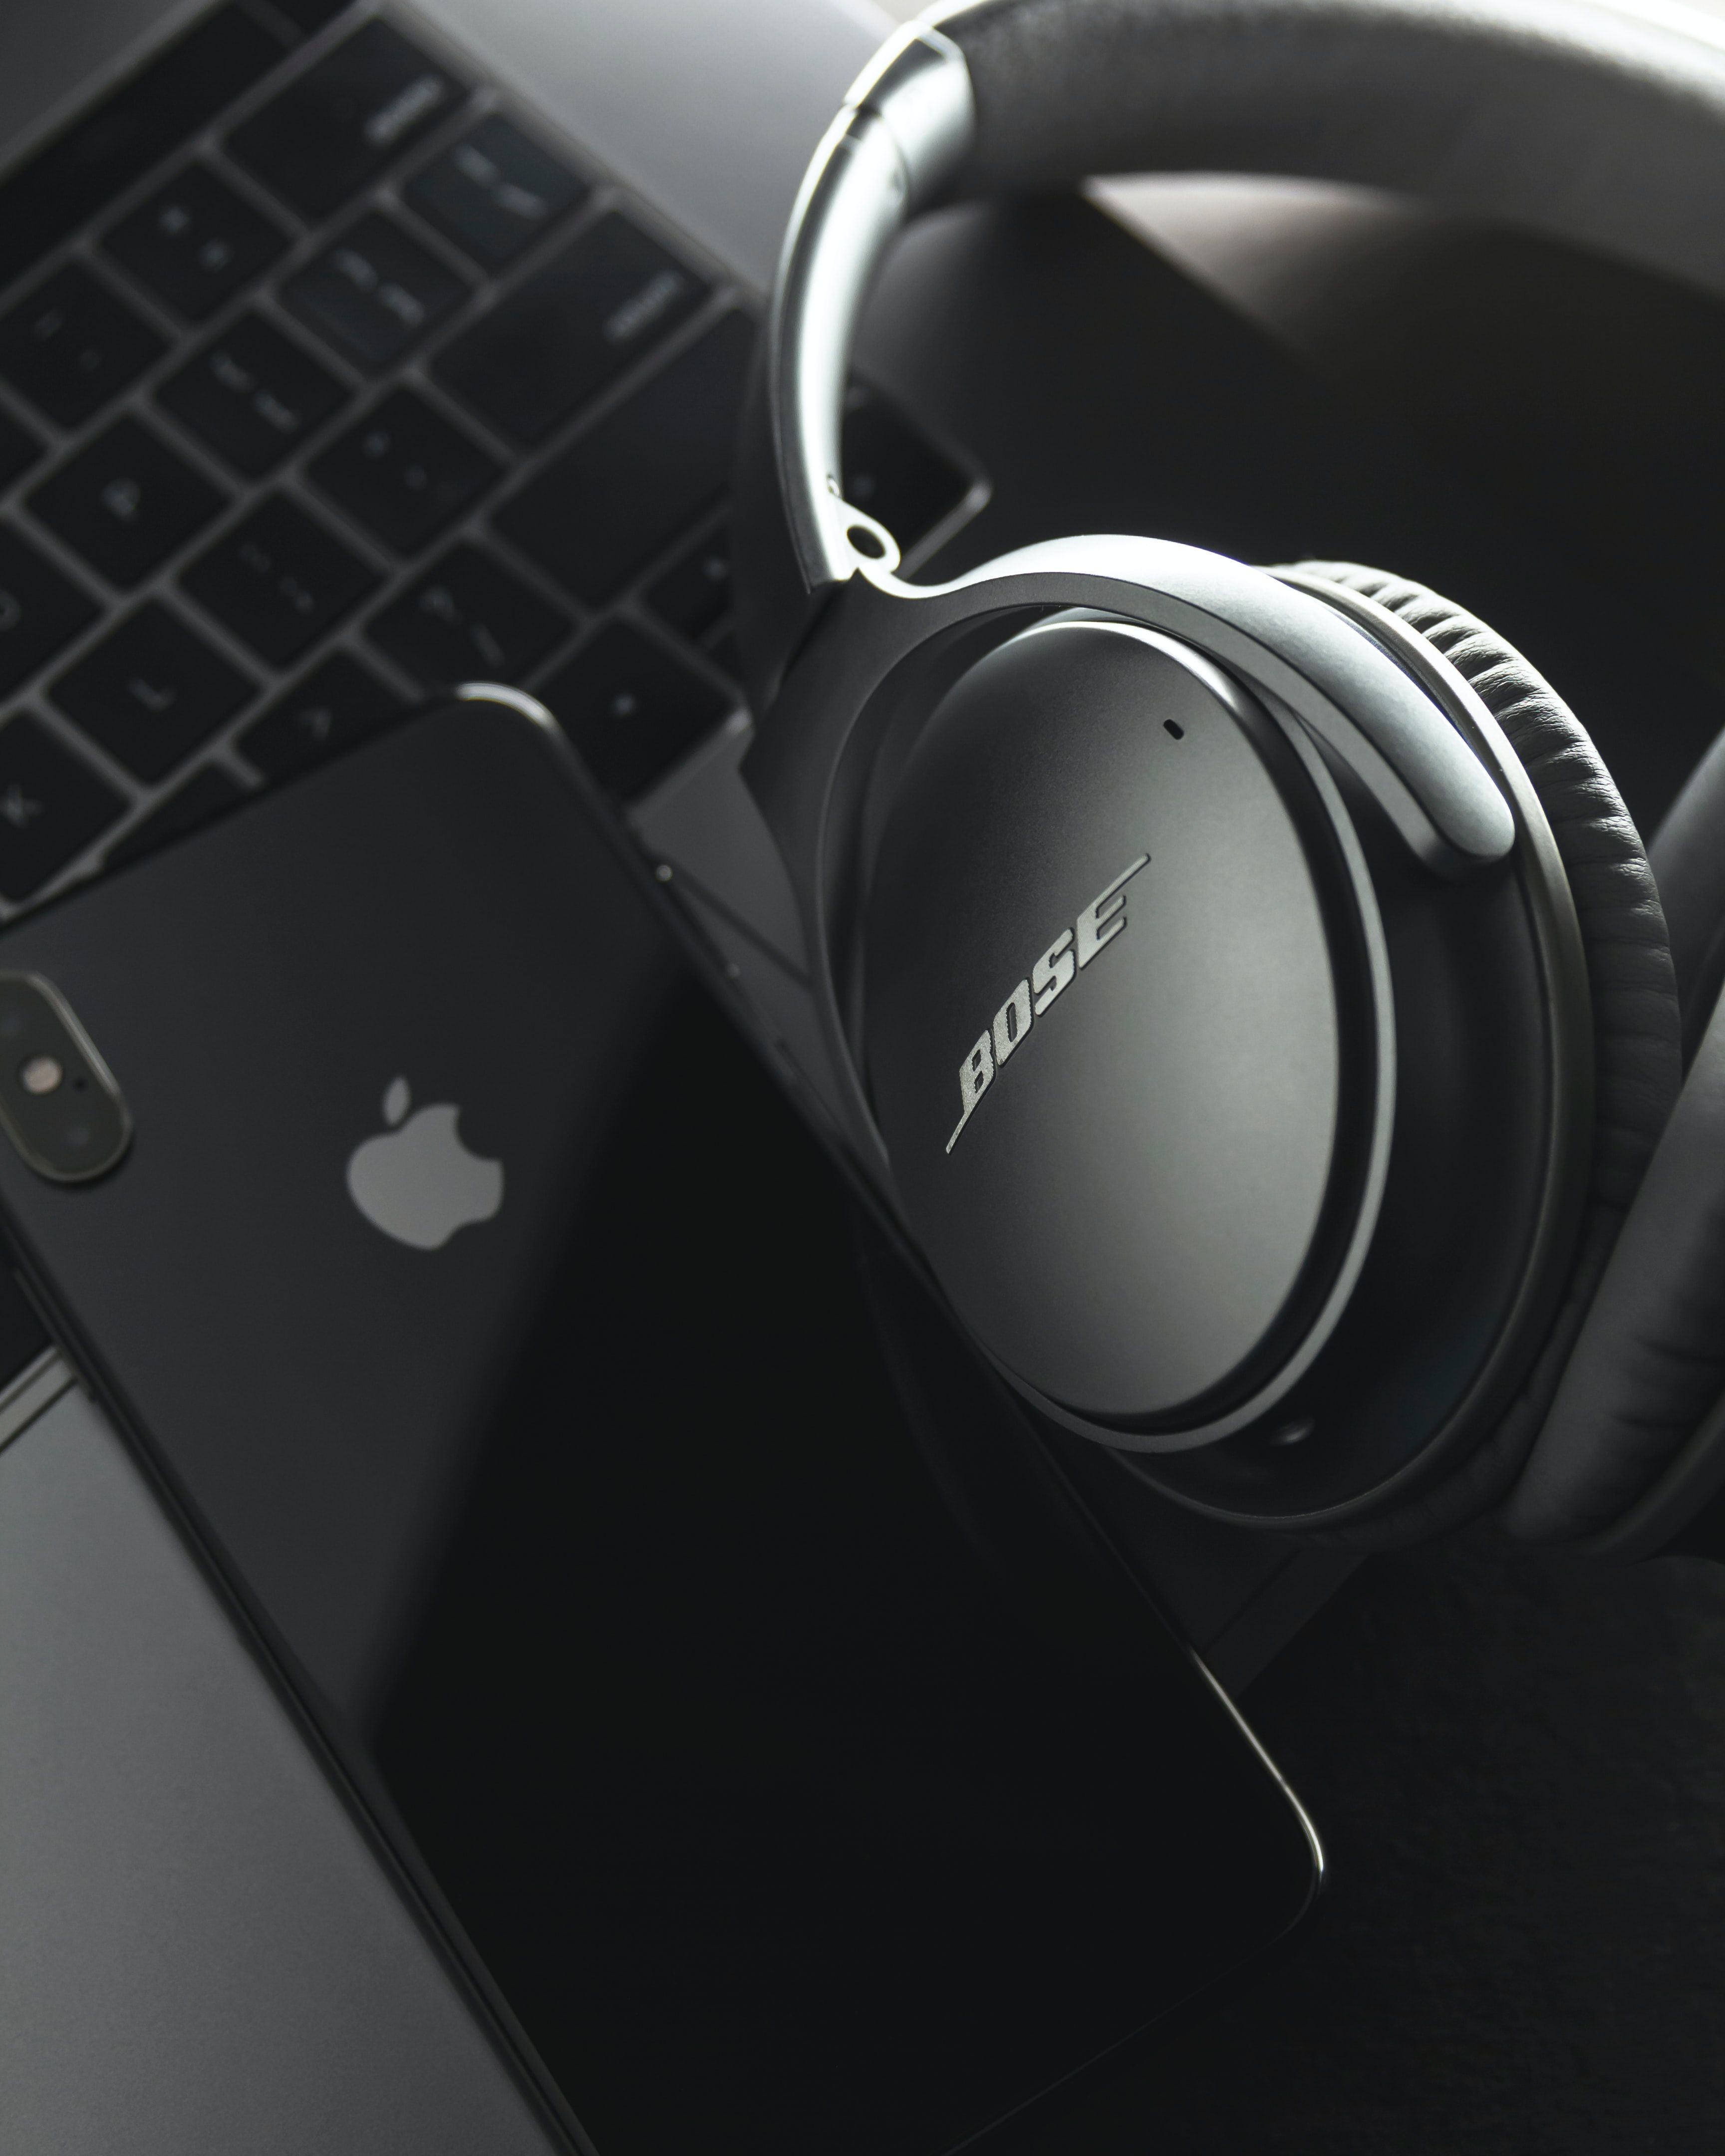 gray and black Bose headset and black iPhone X photo